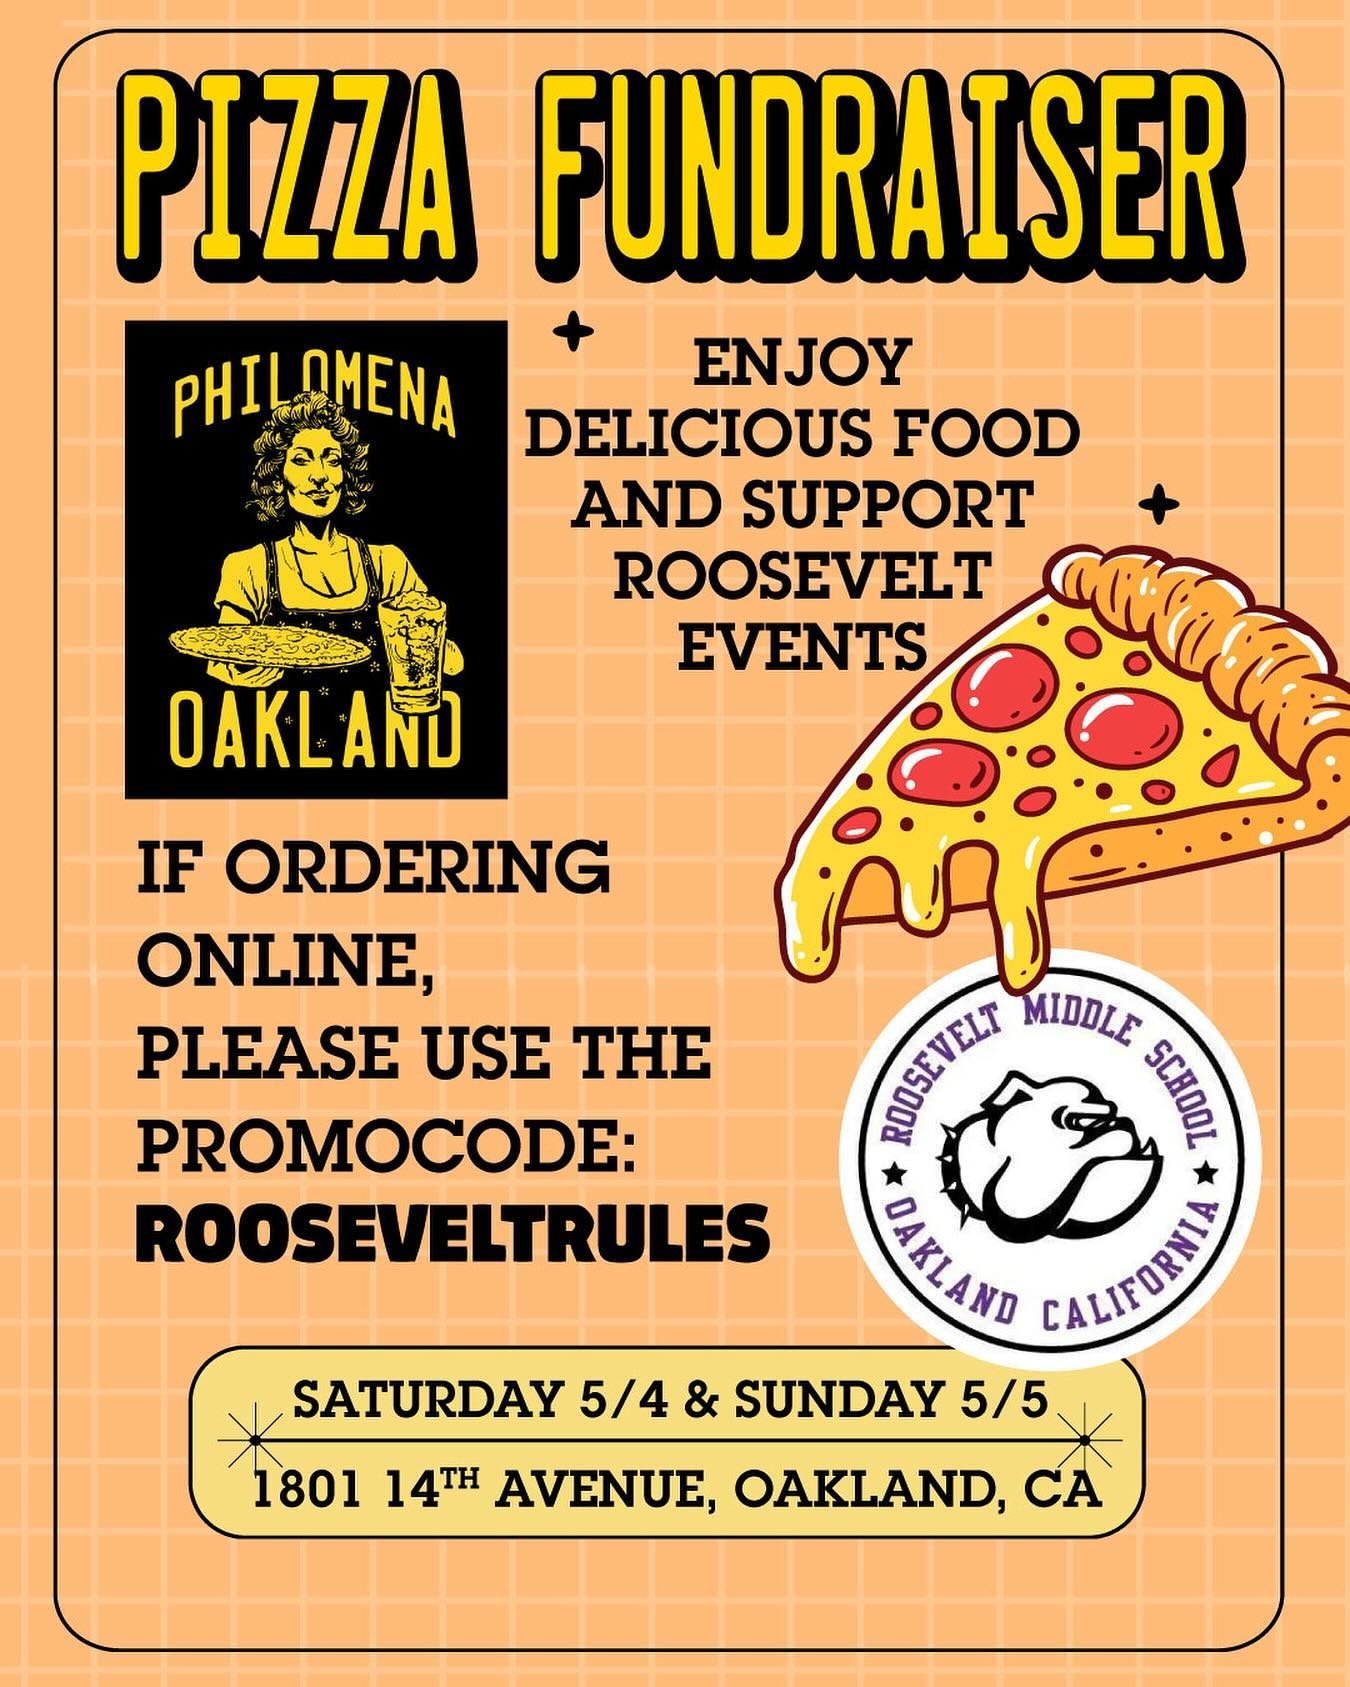 This weekend! Fundraiser for Roosevelt Middle School! @rms_oak Support Oakland Public Education &amp; Oakland Small Business!